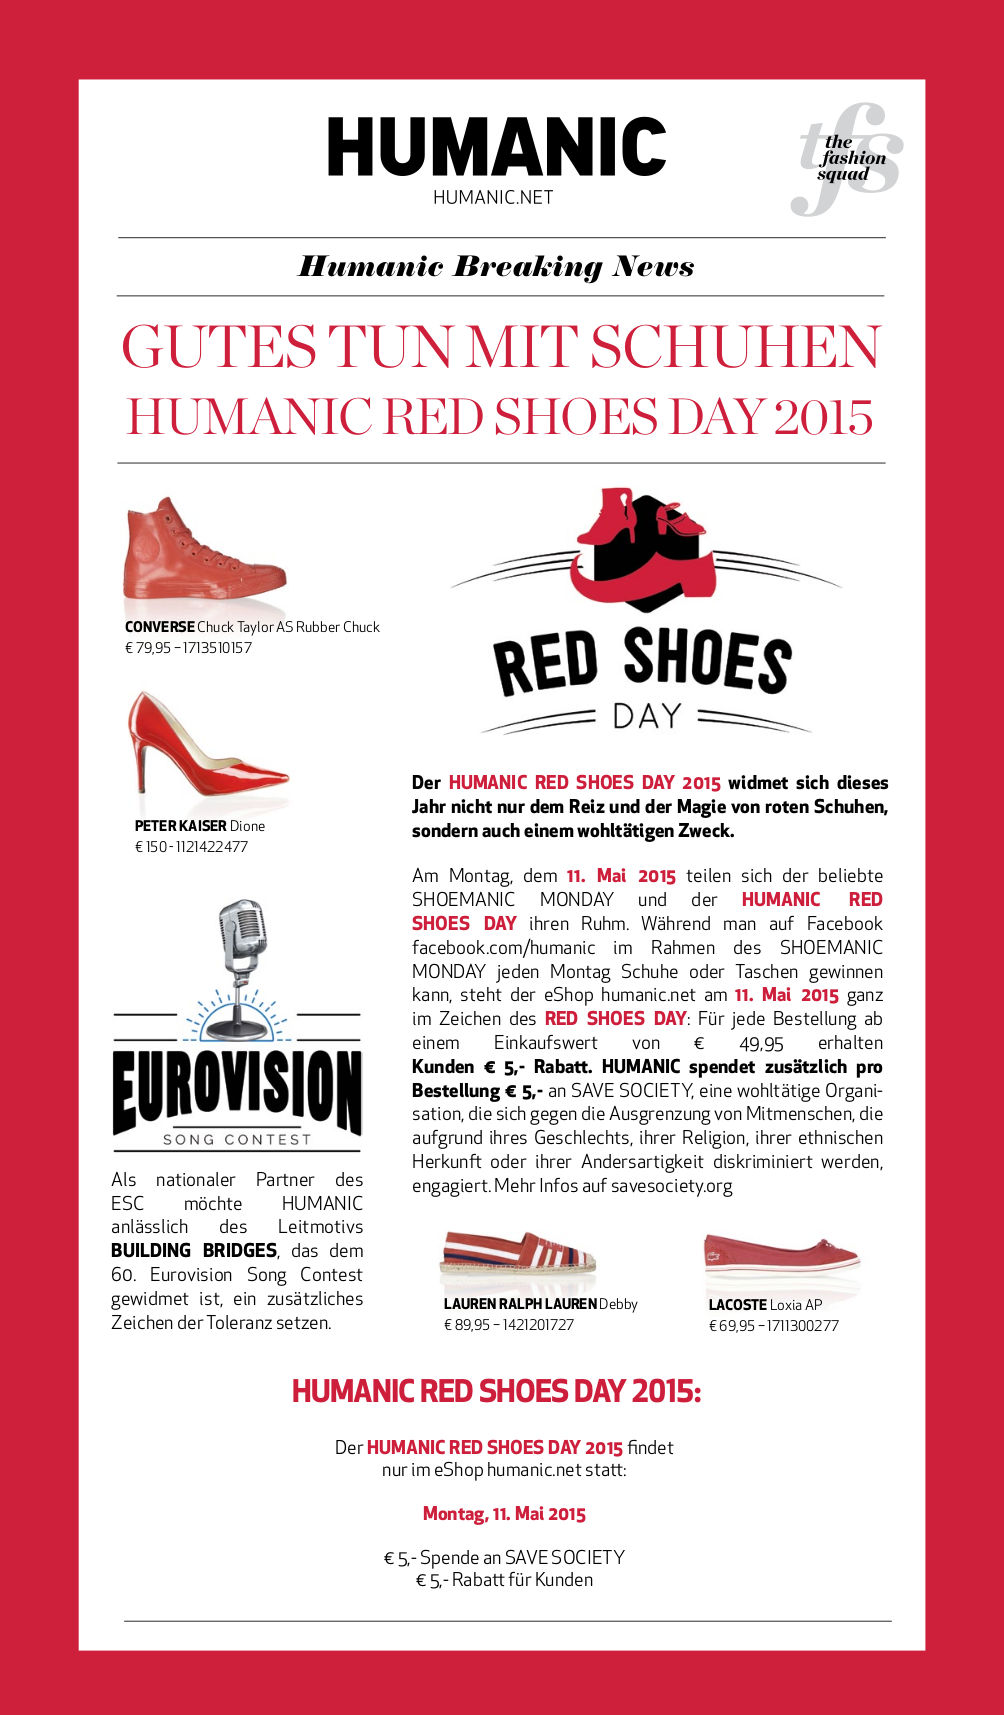 Gutes tun mit Schuhen - Red Shoes Day 2015 - save-society.org